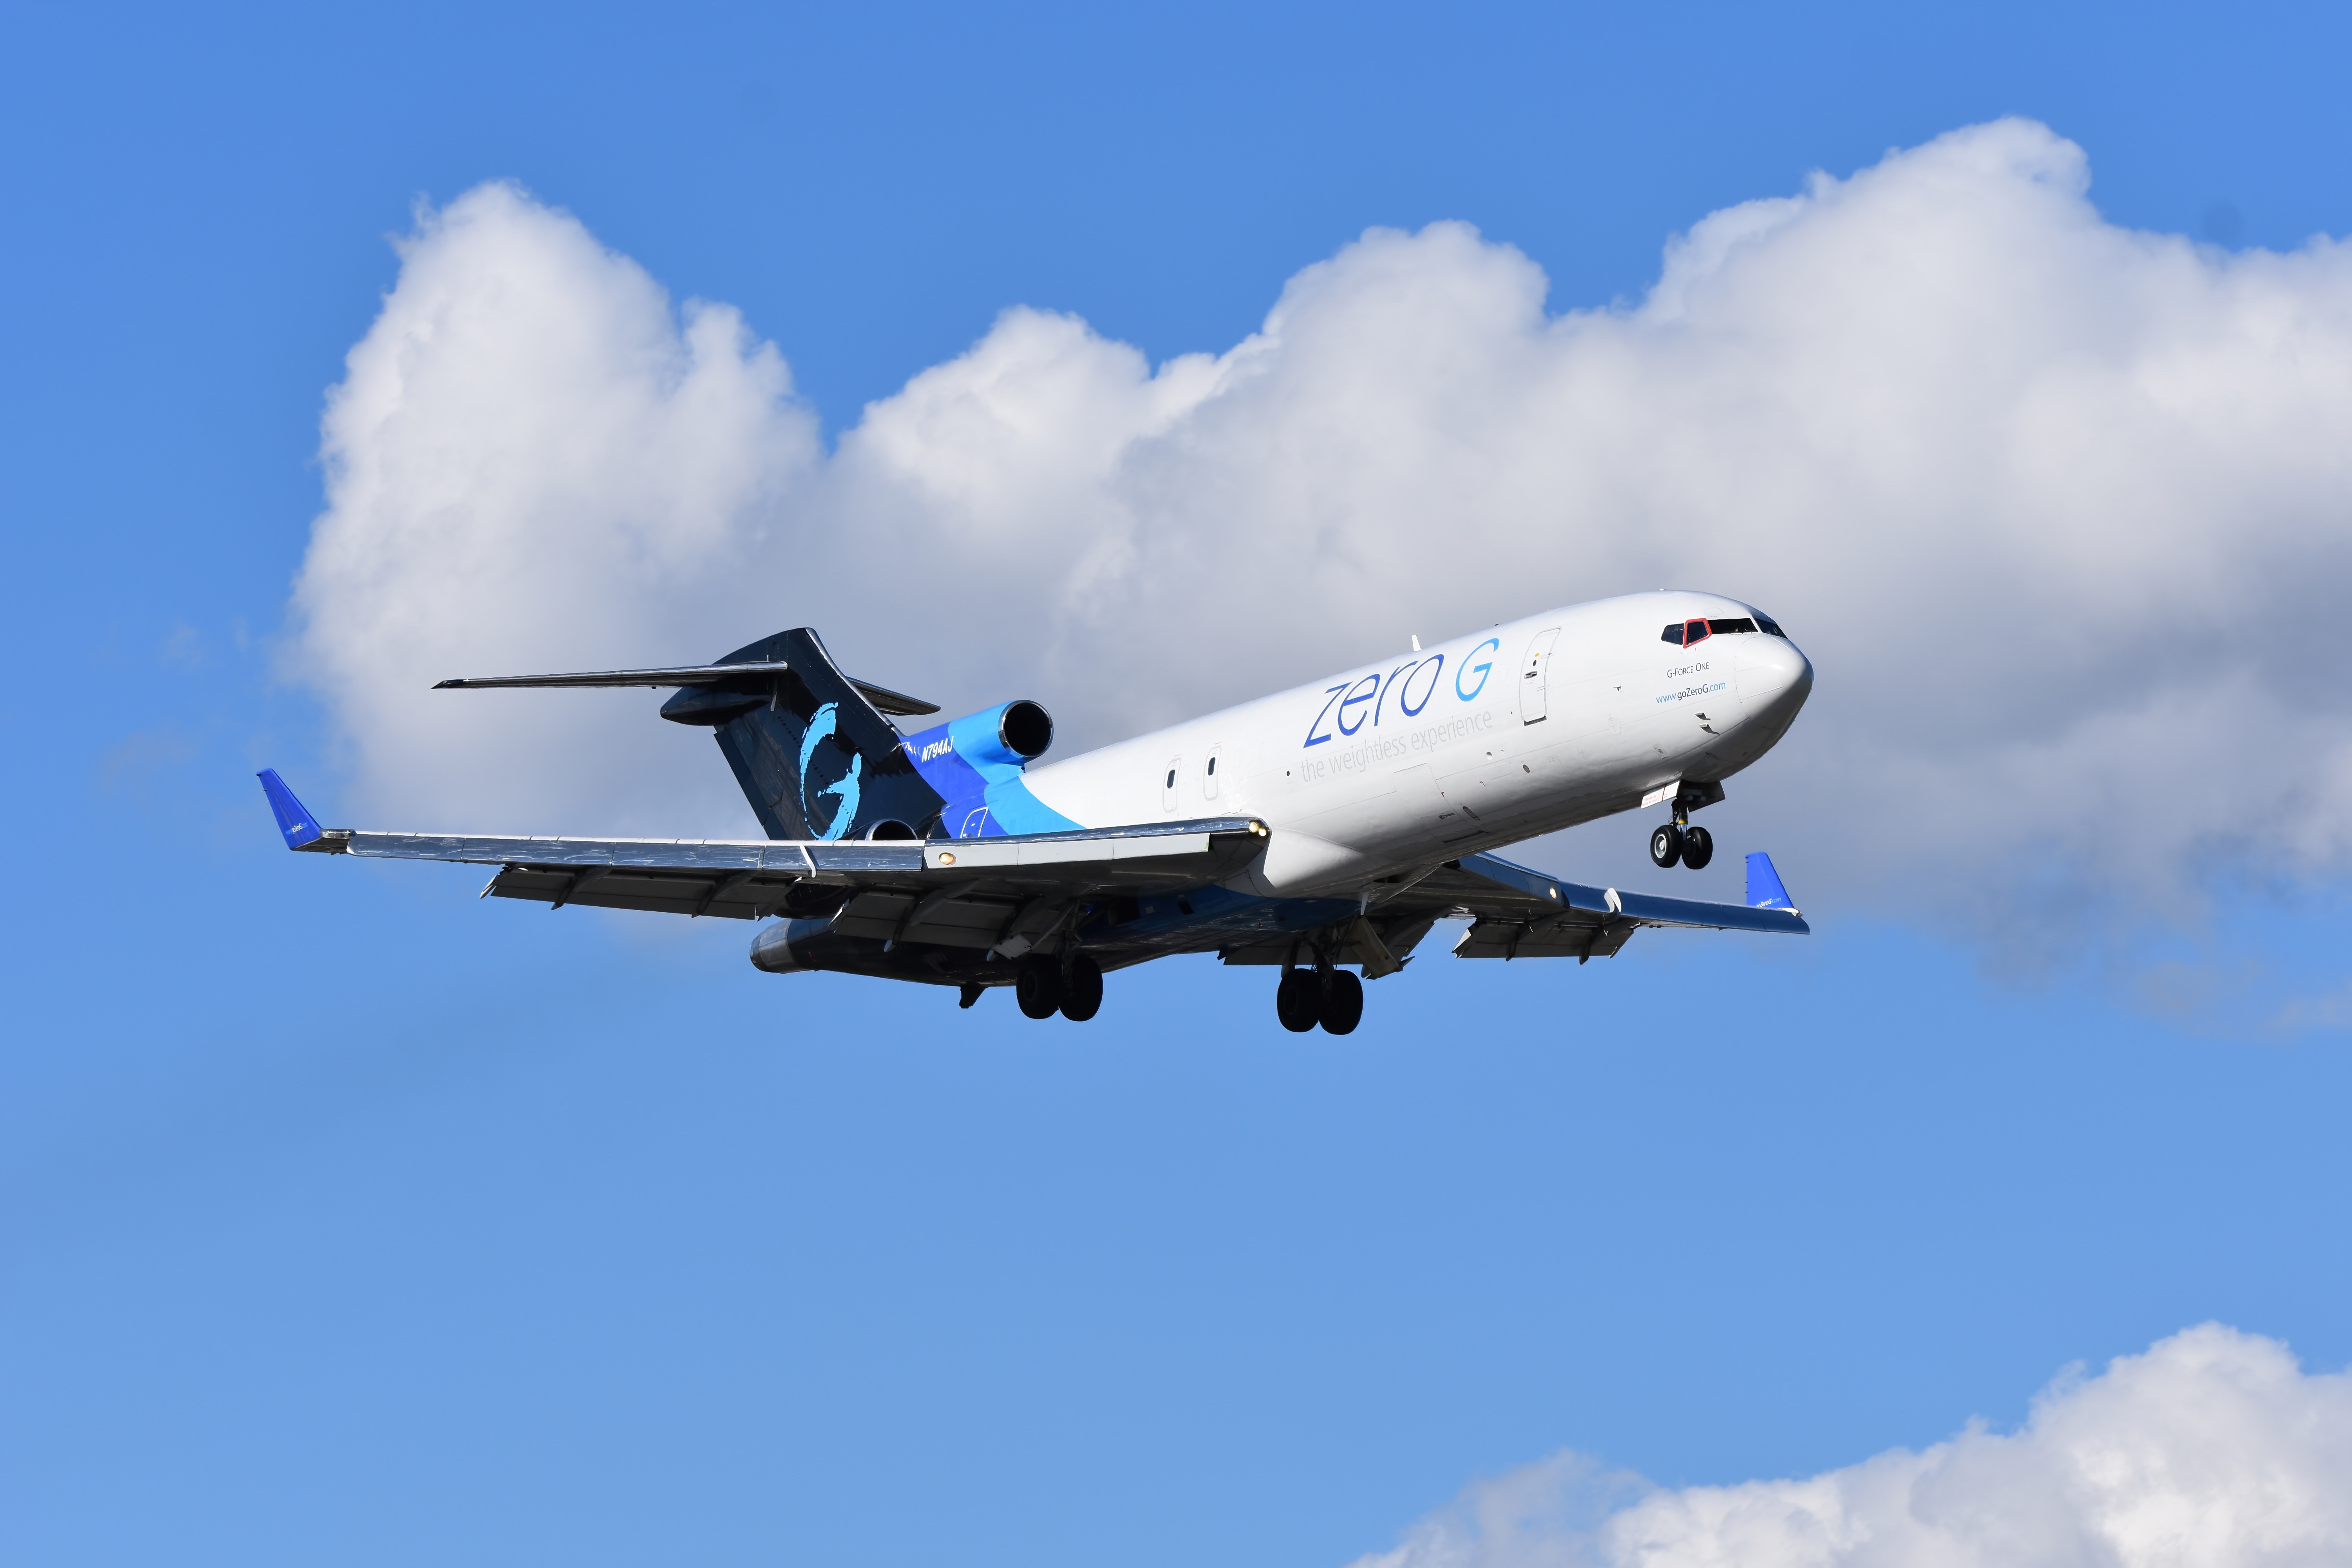 Weightless in Seattle: Behind the scenes with Zero G's 727 – The